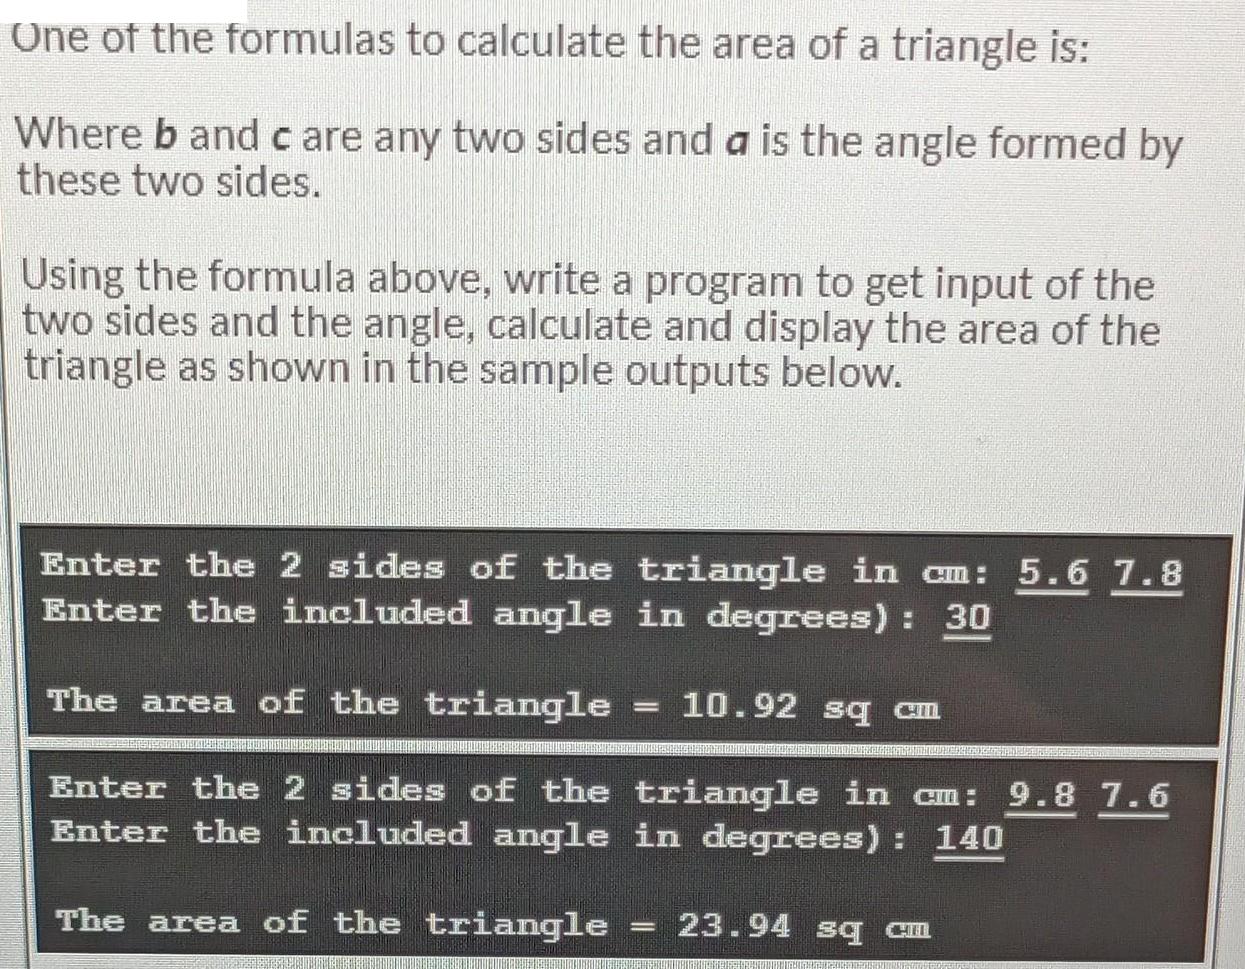 One of the formulas to calculate the area of a triangle is: Where b and care any two sides and a is the angle